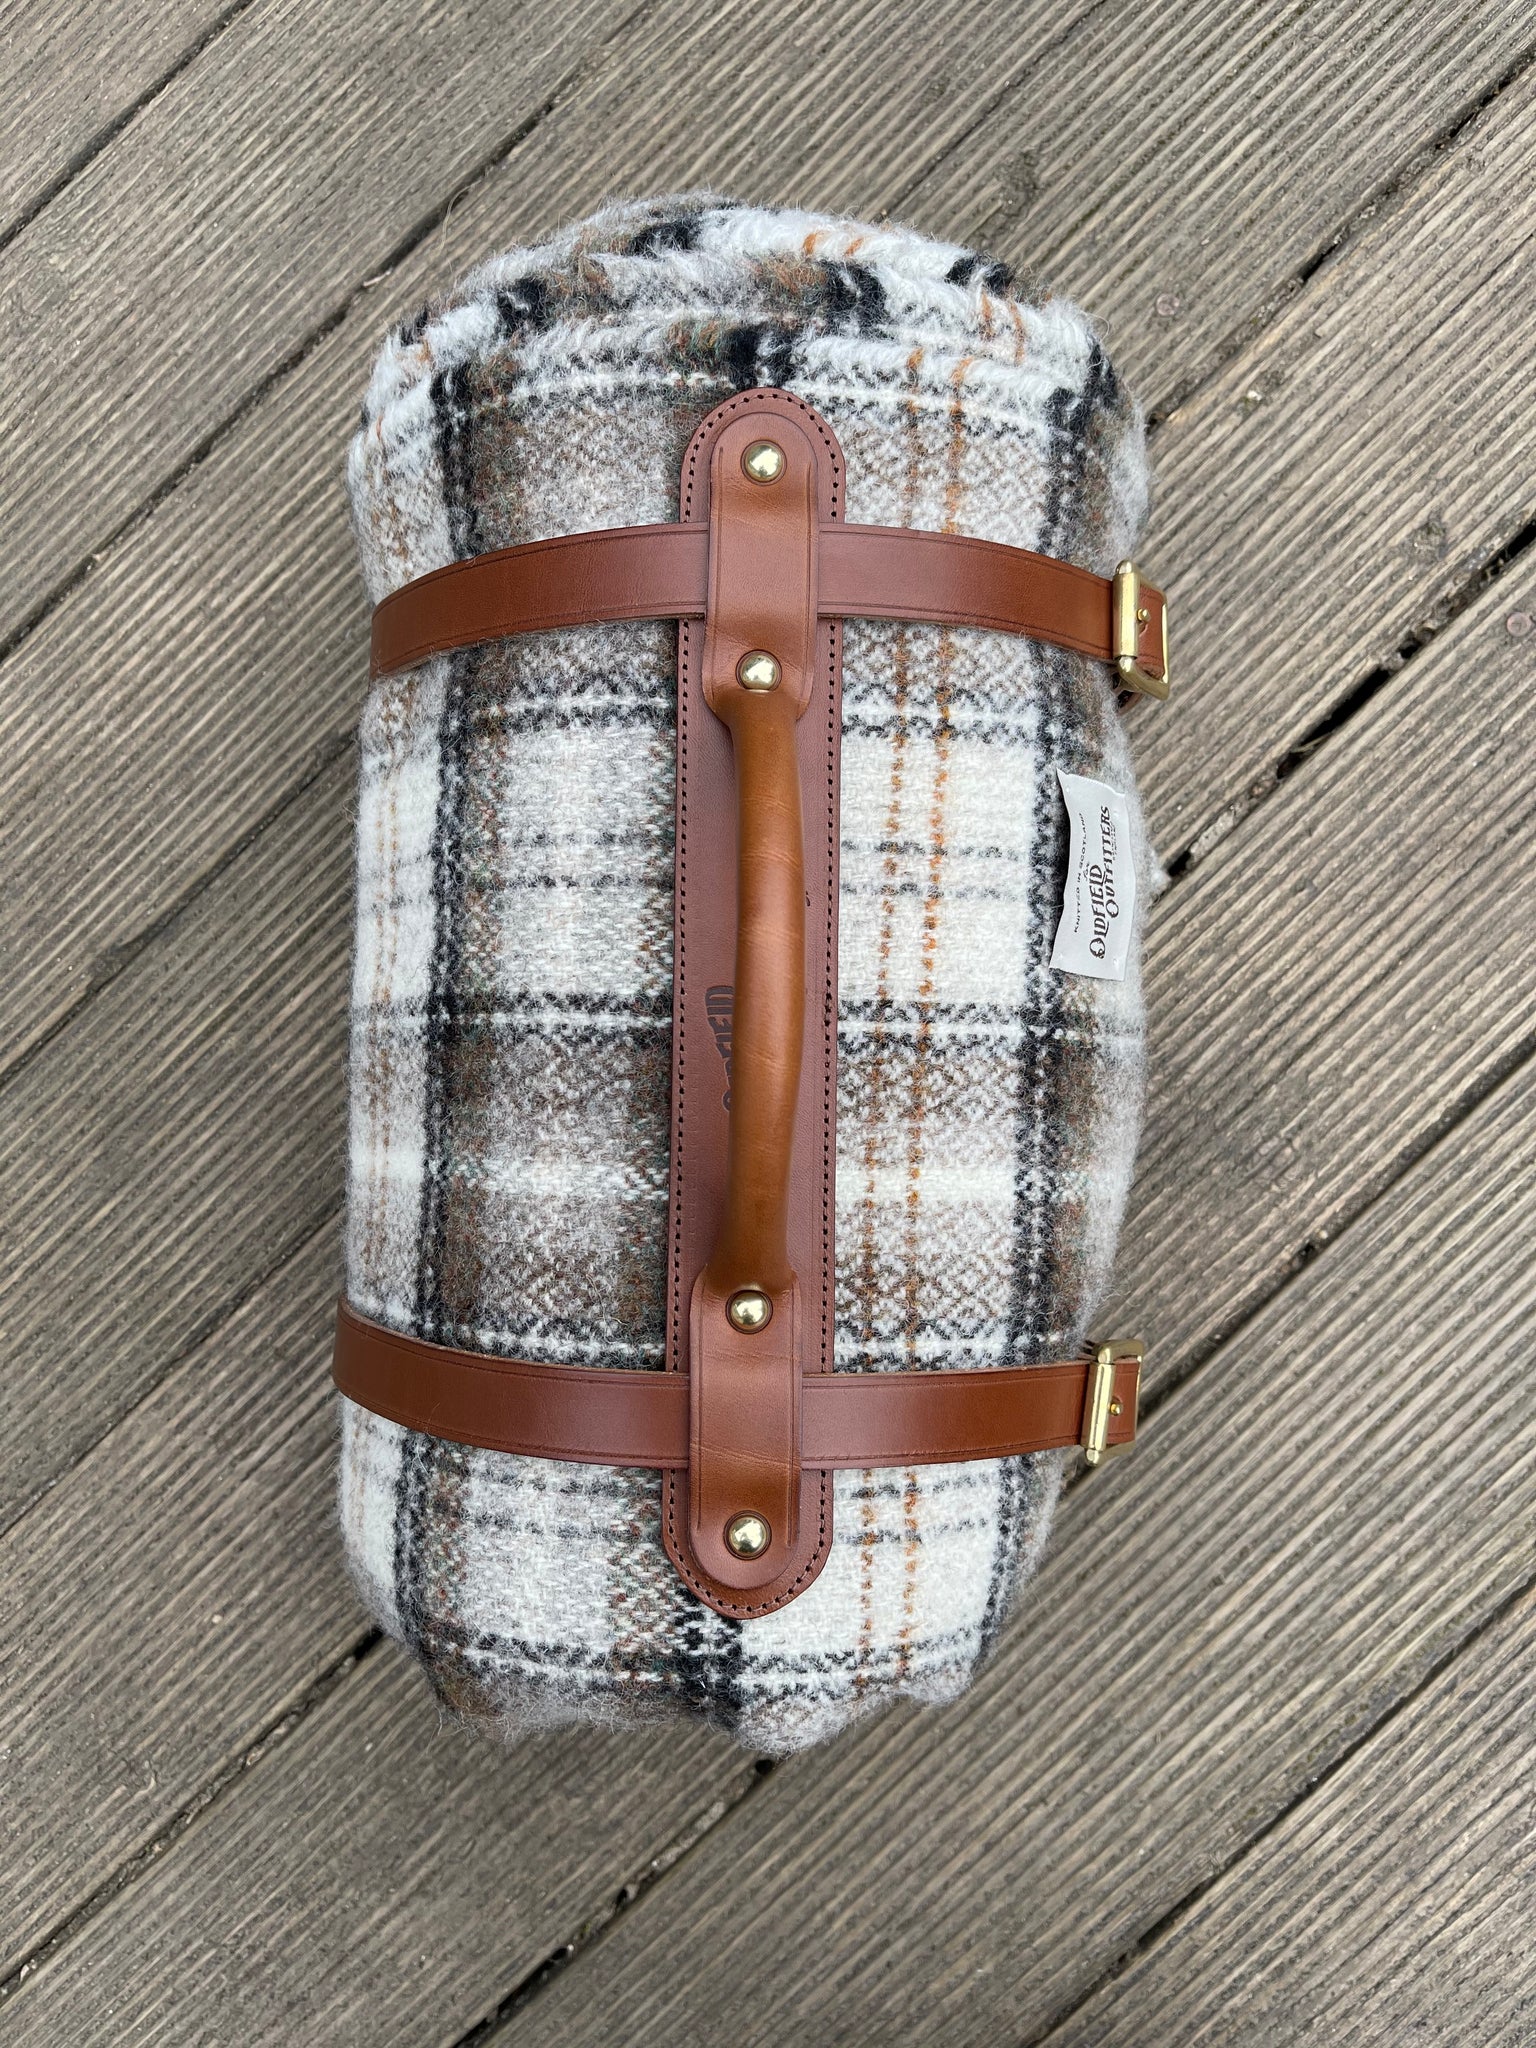 Shetland wool Blanket with English Crafted Vintage leather handle